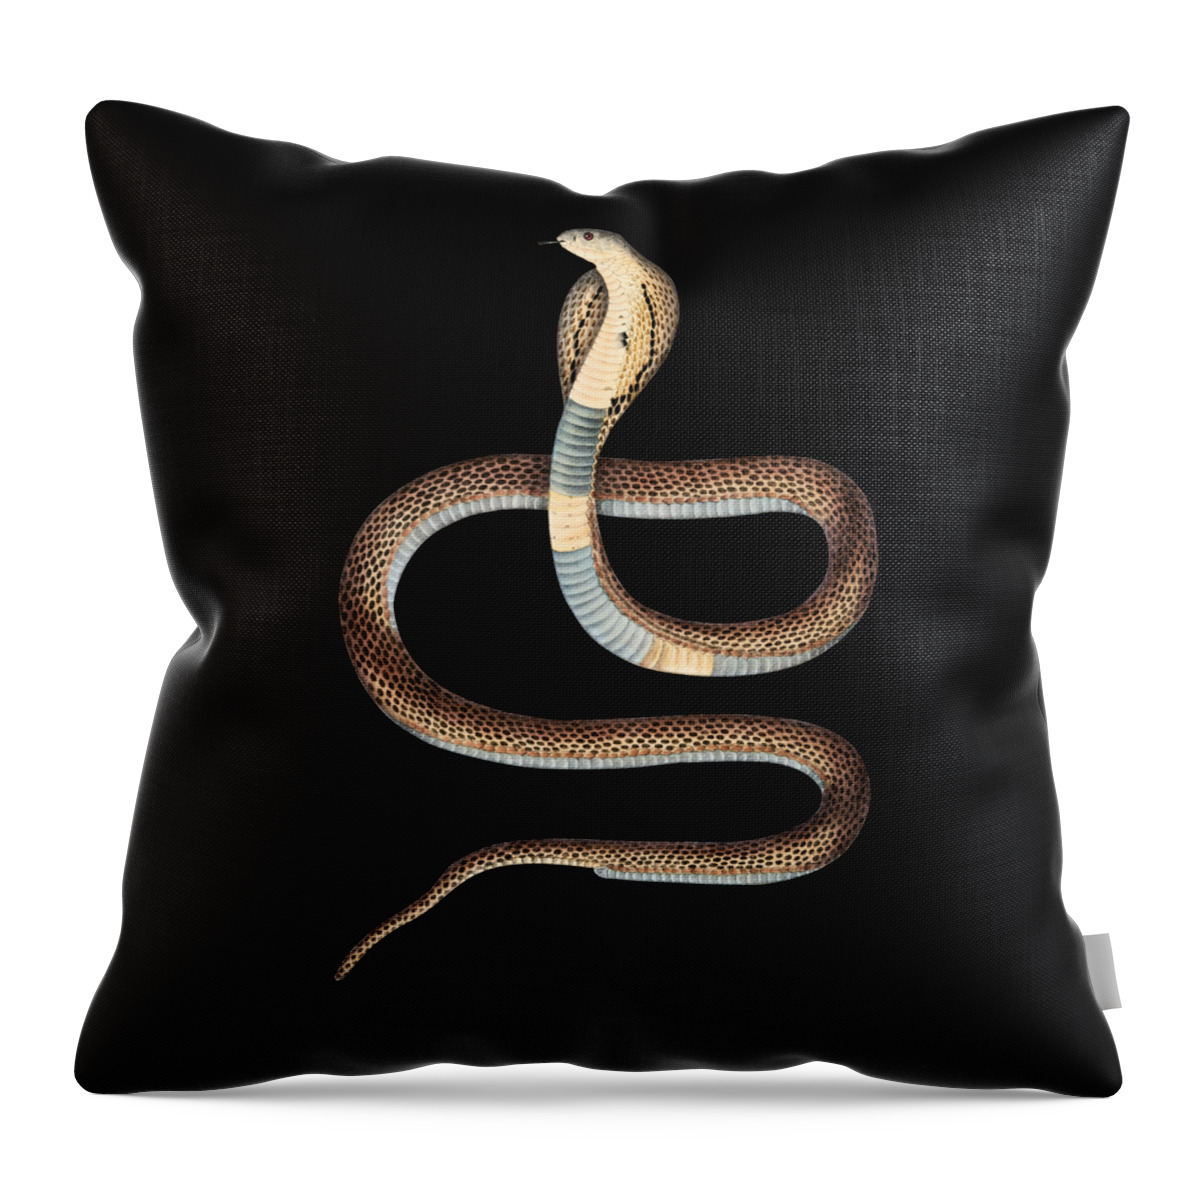 Snake Throw Pillow featuring the digital art Snake, Cute, Tattoo, Reptile, Dont Tread On Me #5 by Alberto Rodriguez